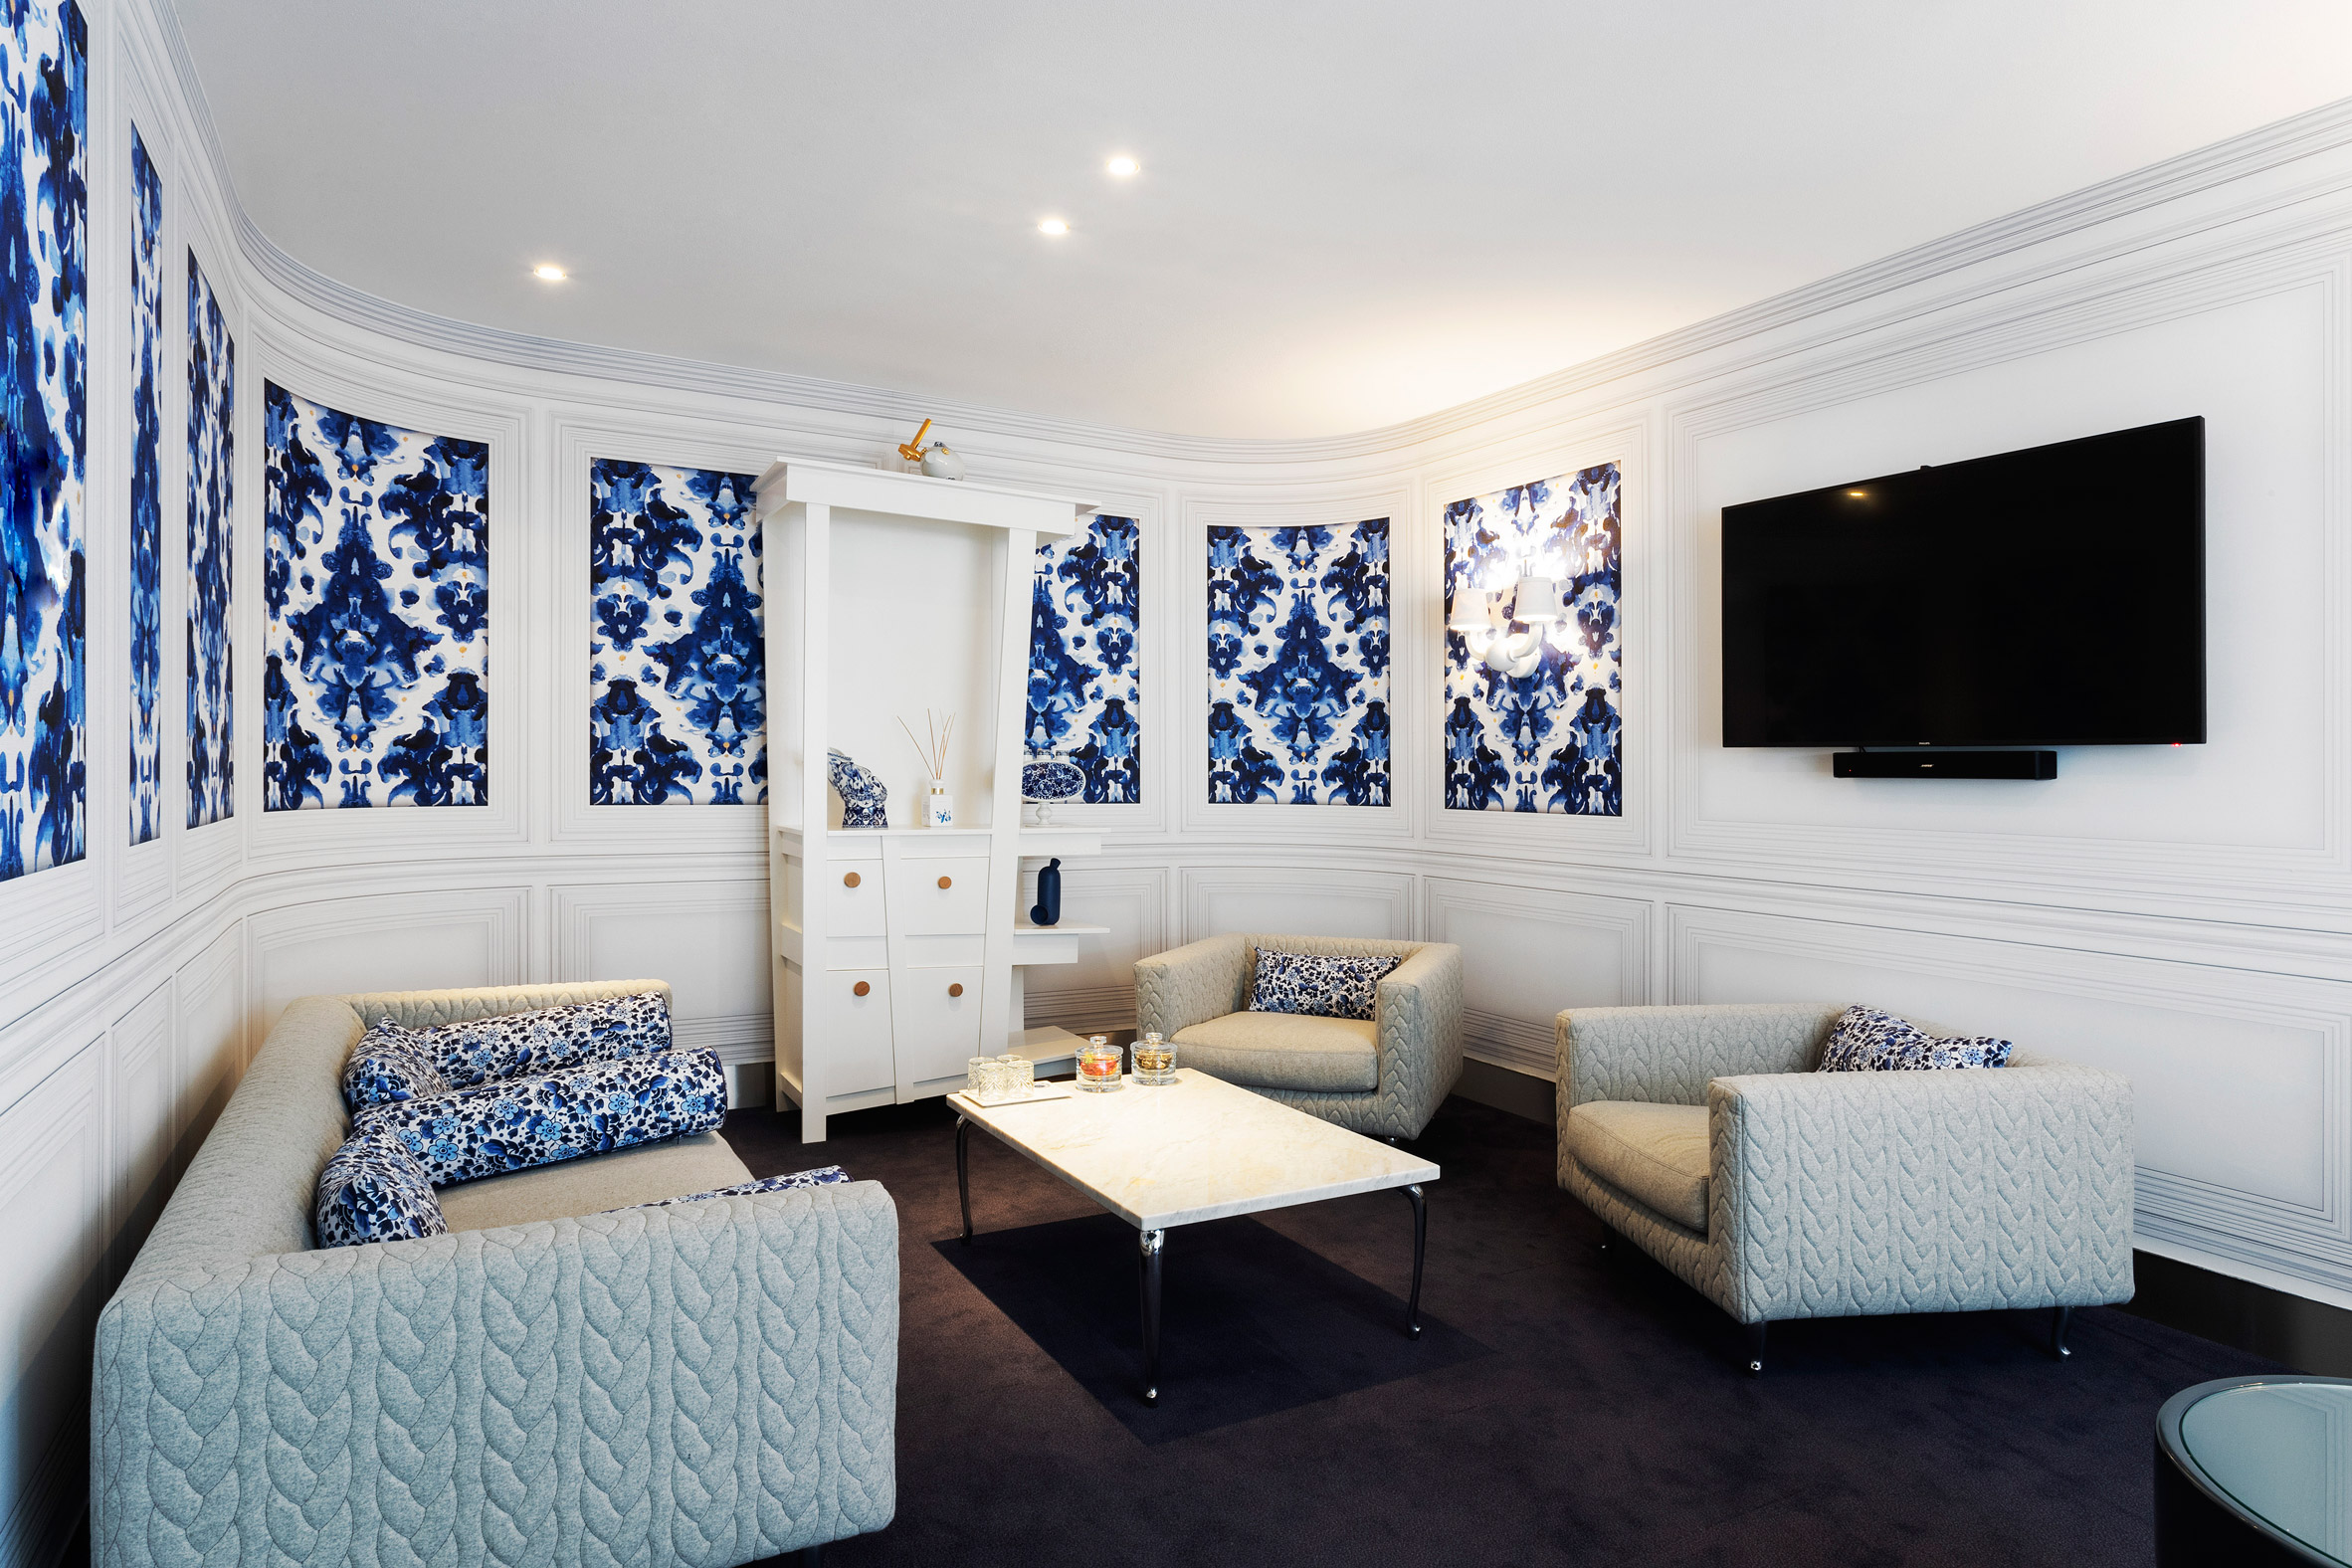 Blue-and-white room in airport lounge designed by Marcel Wanders